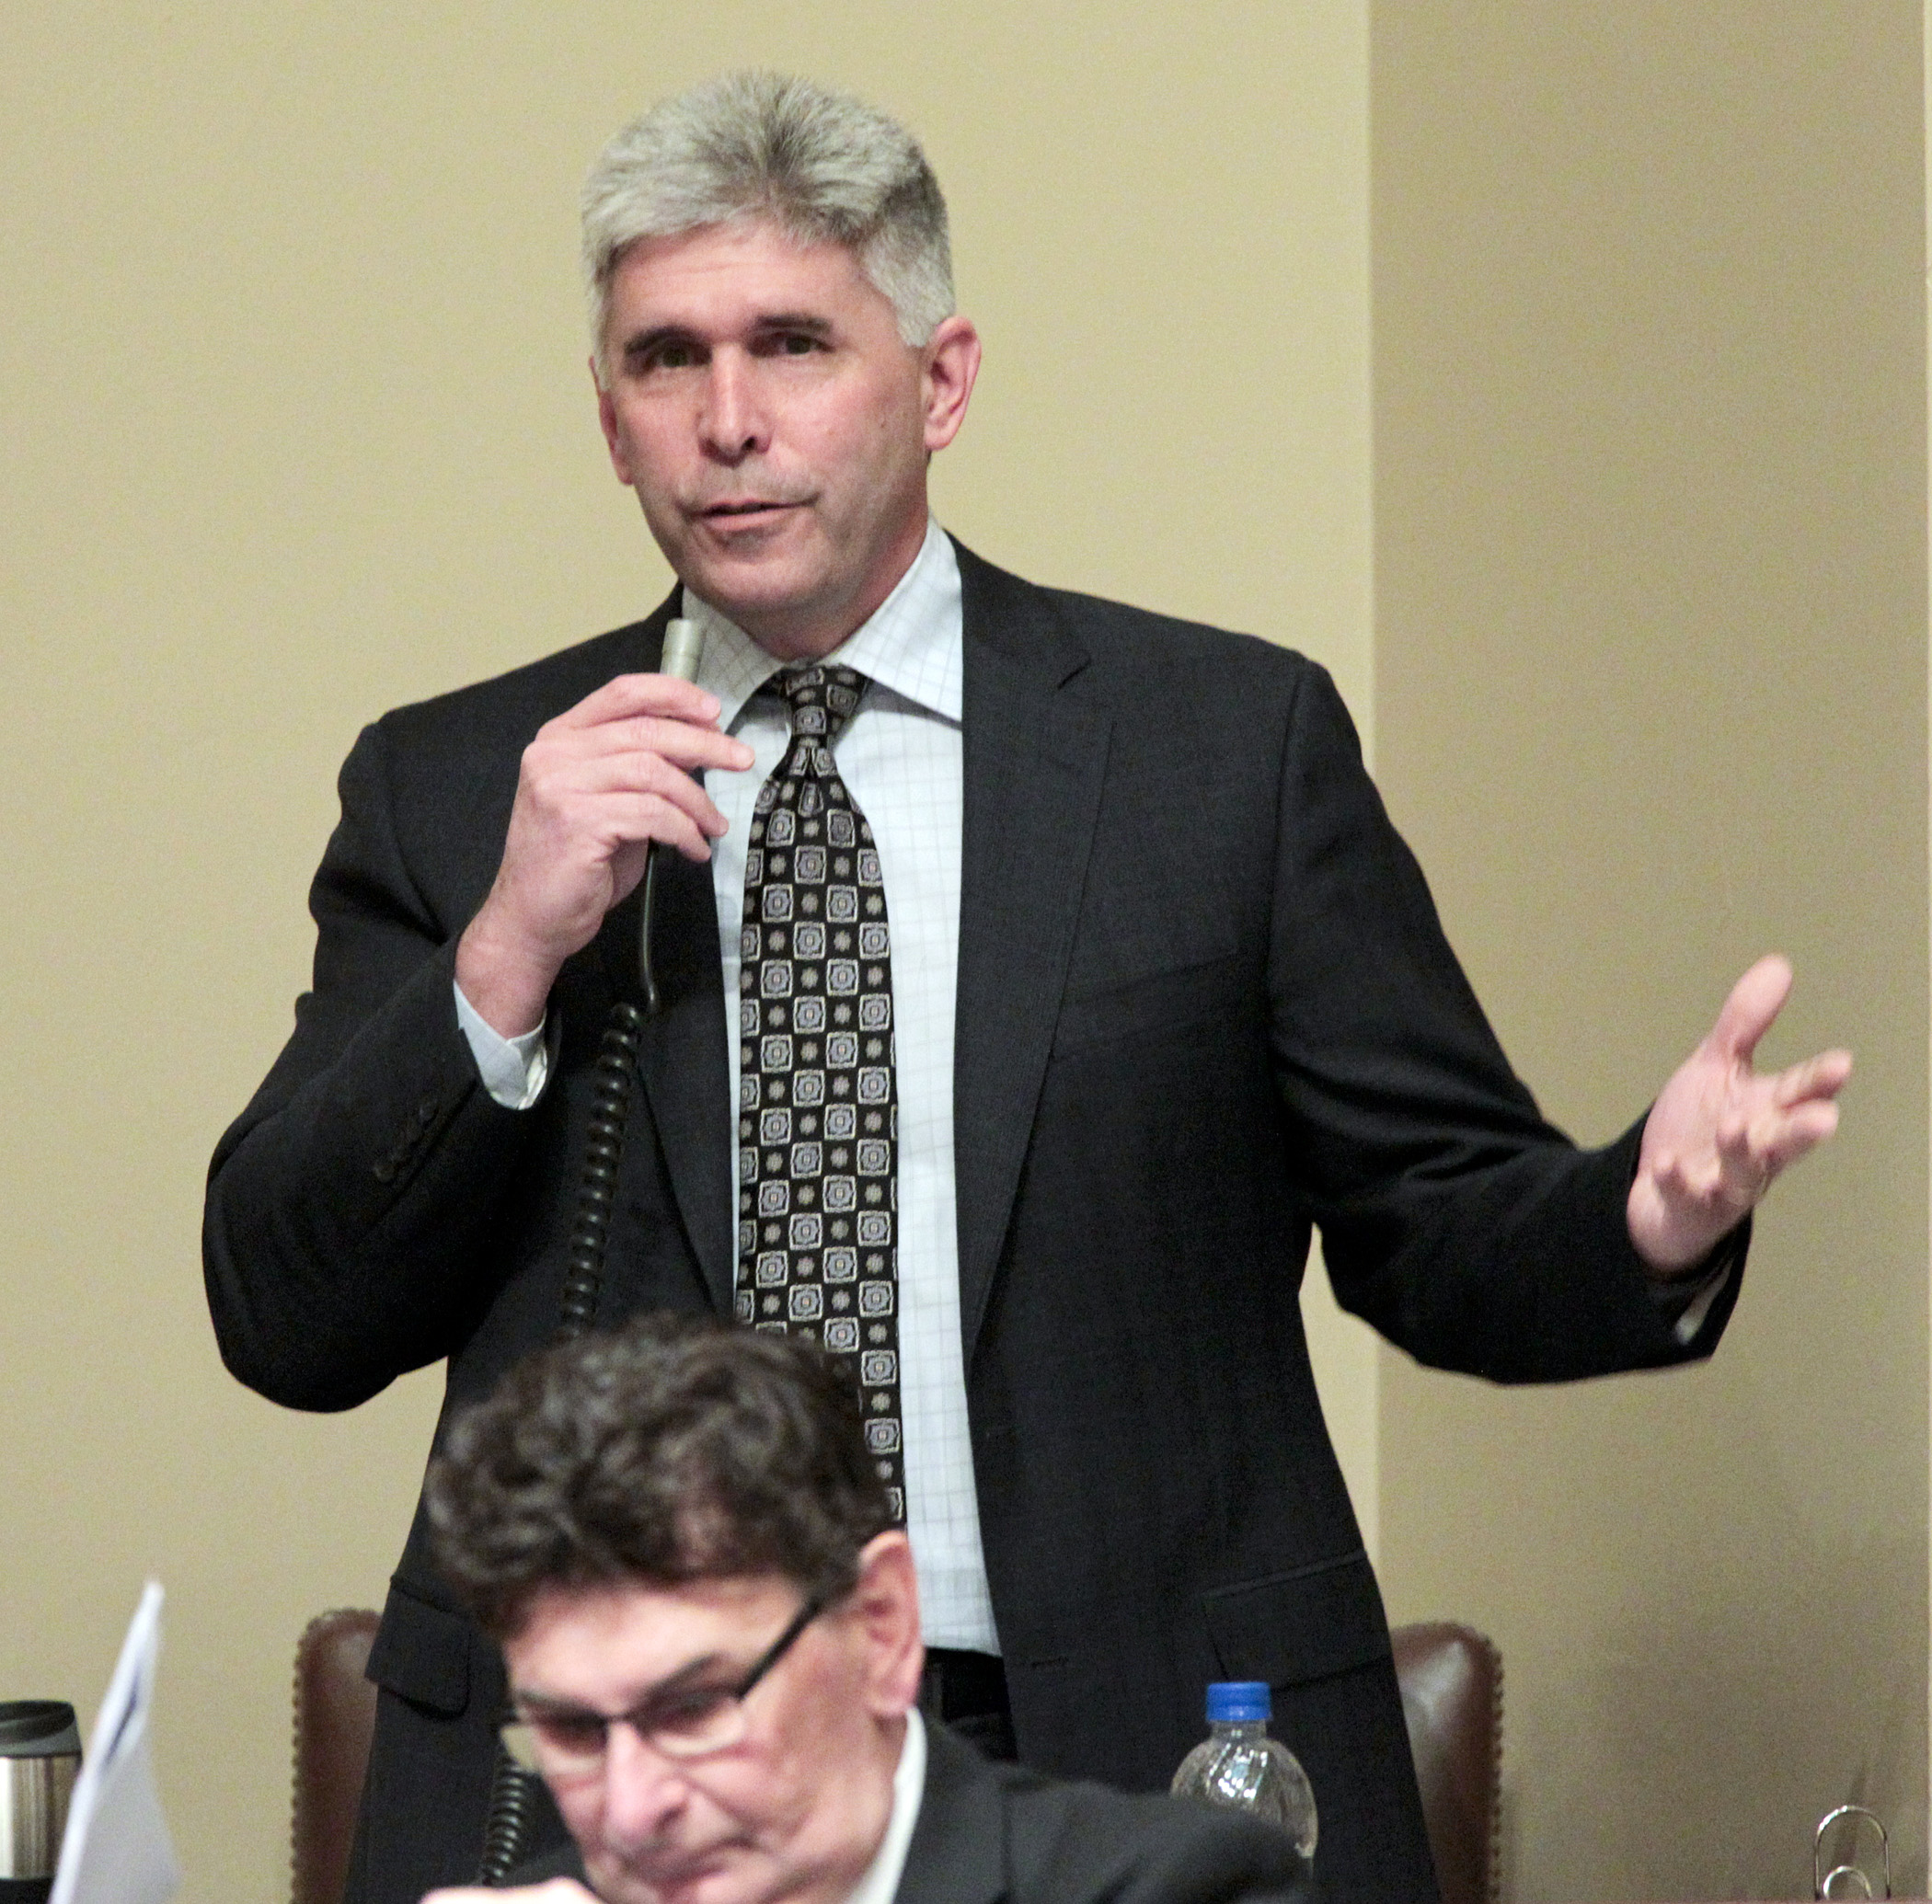 Rep. Joe Atkins answers a member’s questions May 8 regarding his attempt to amend the House omnibus liquor bill, minus a provision to allow Sunday growler sales, to SF2336. Photo by Paul Battaglia